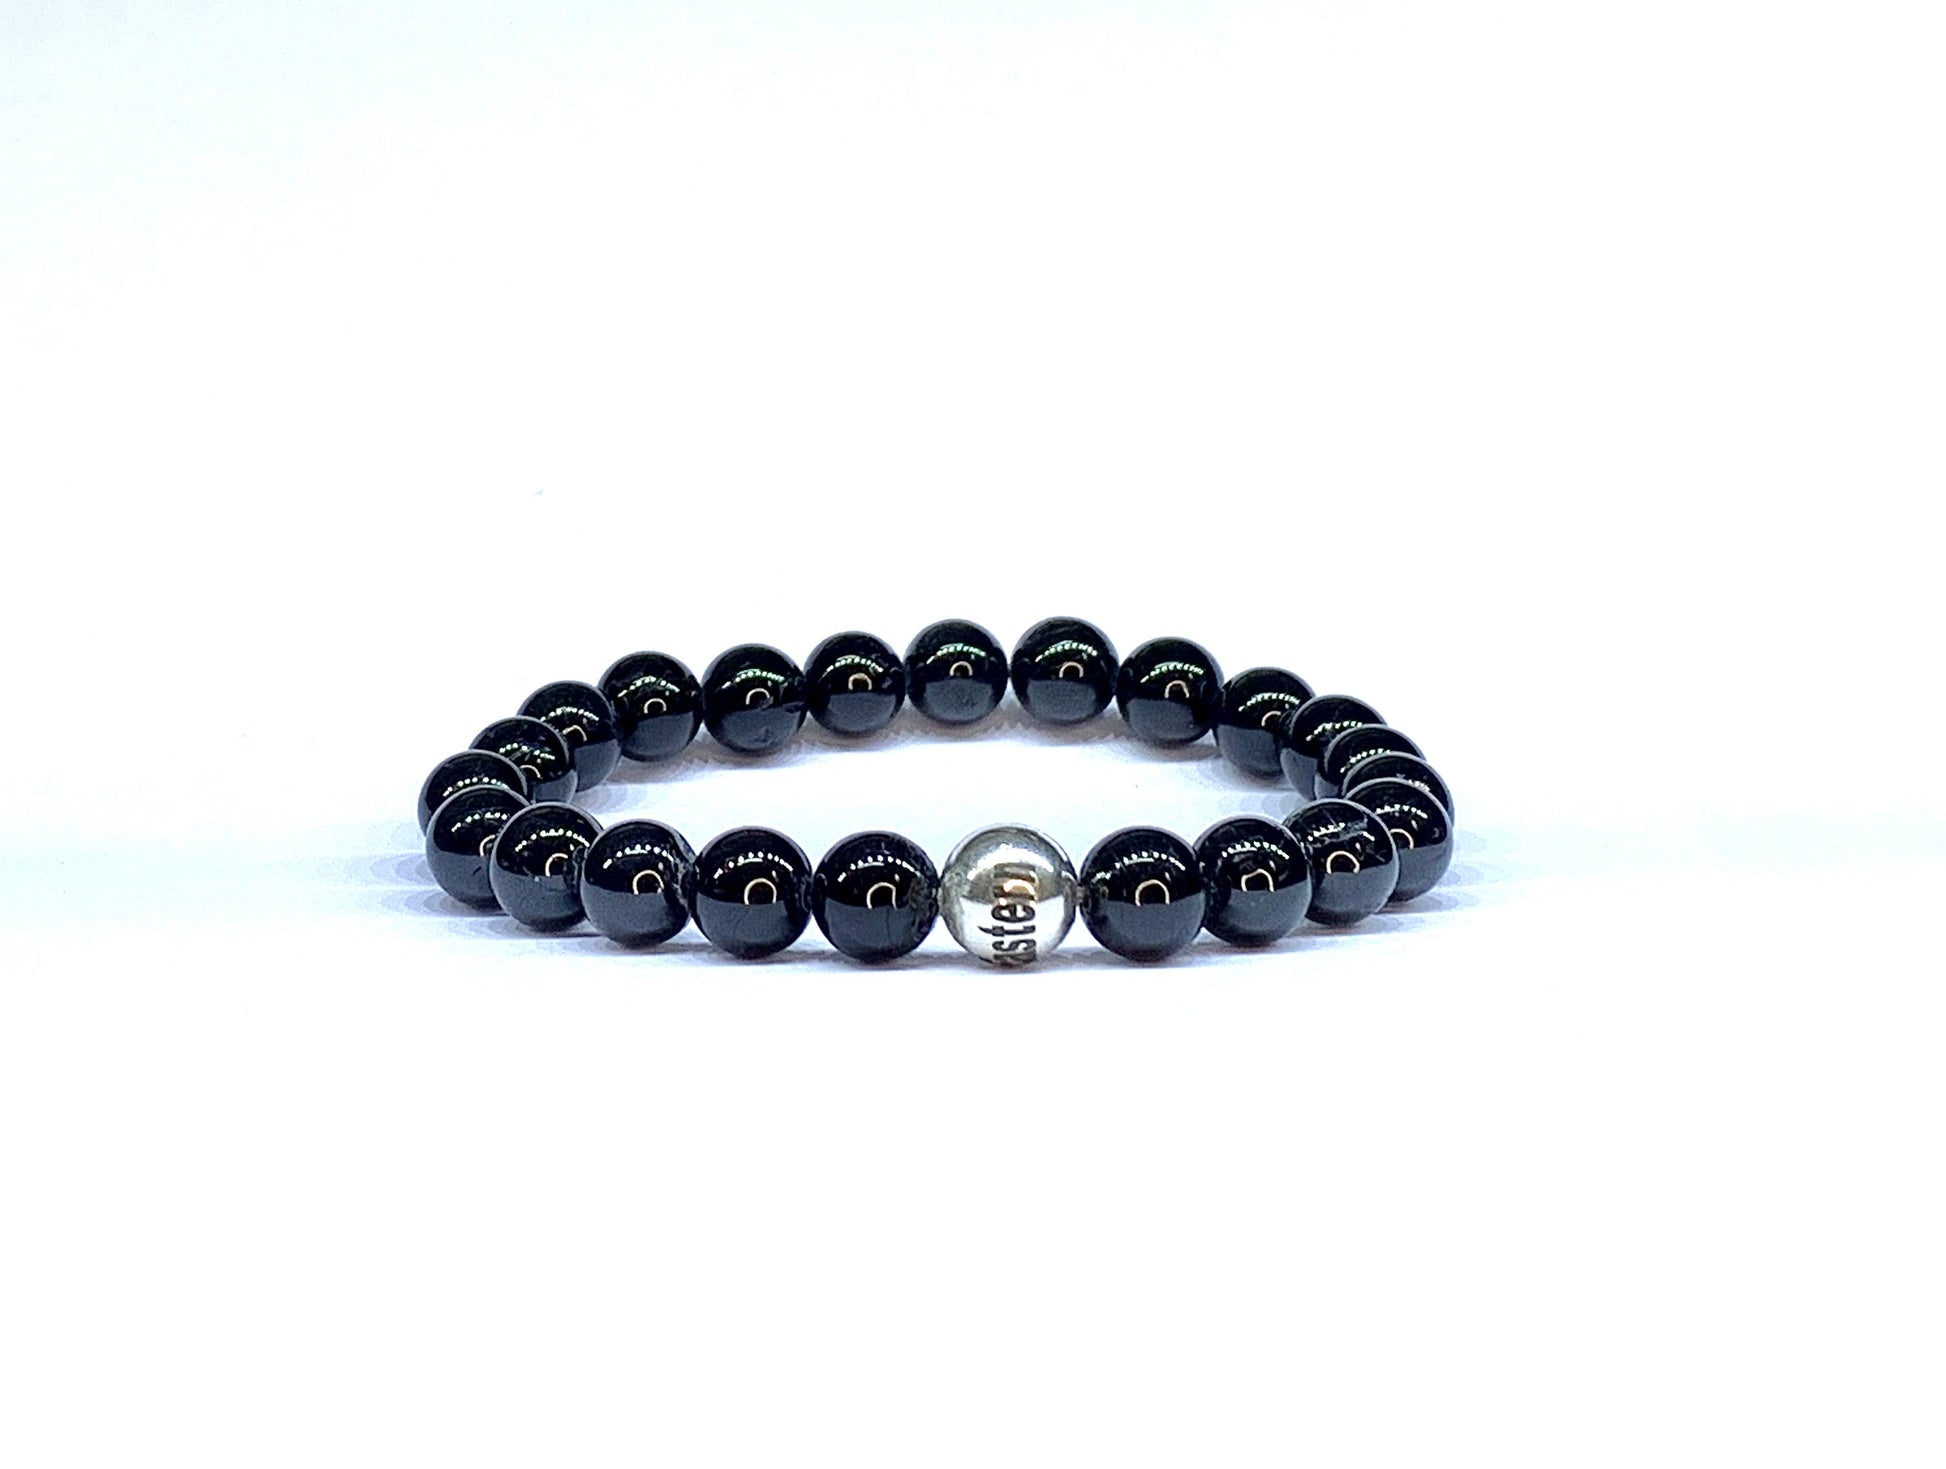 Black Tourmaline bead bracelet, with Eastern Adornment branded silver bead.